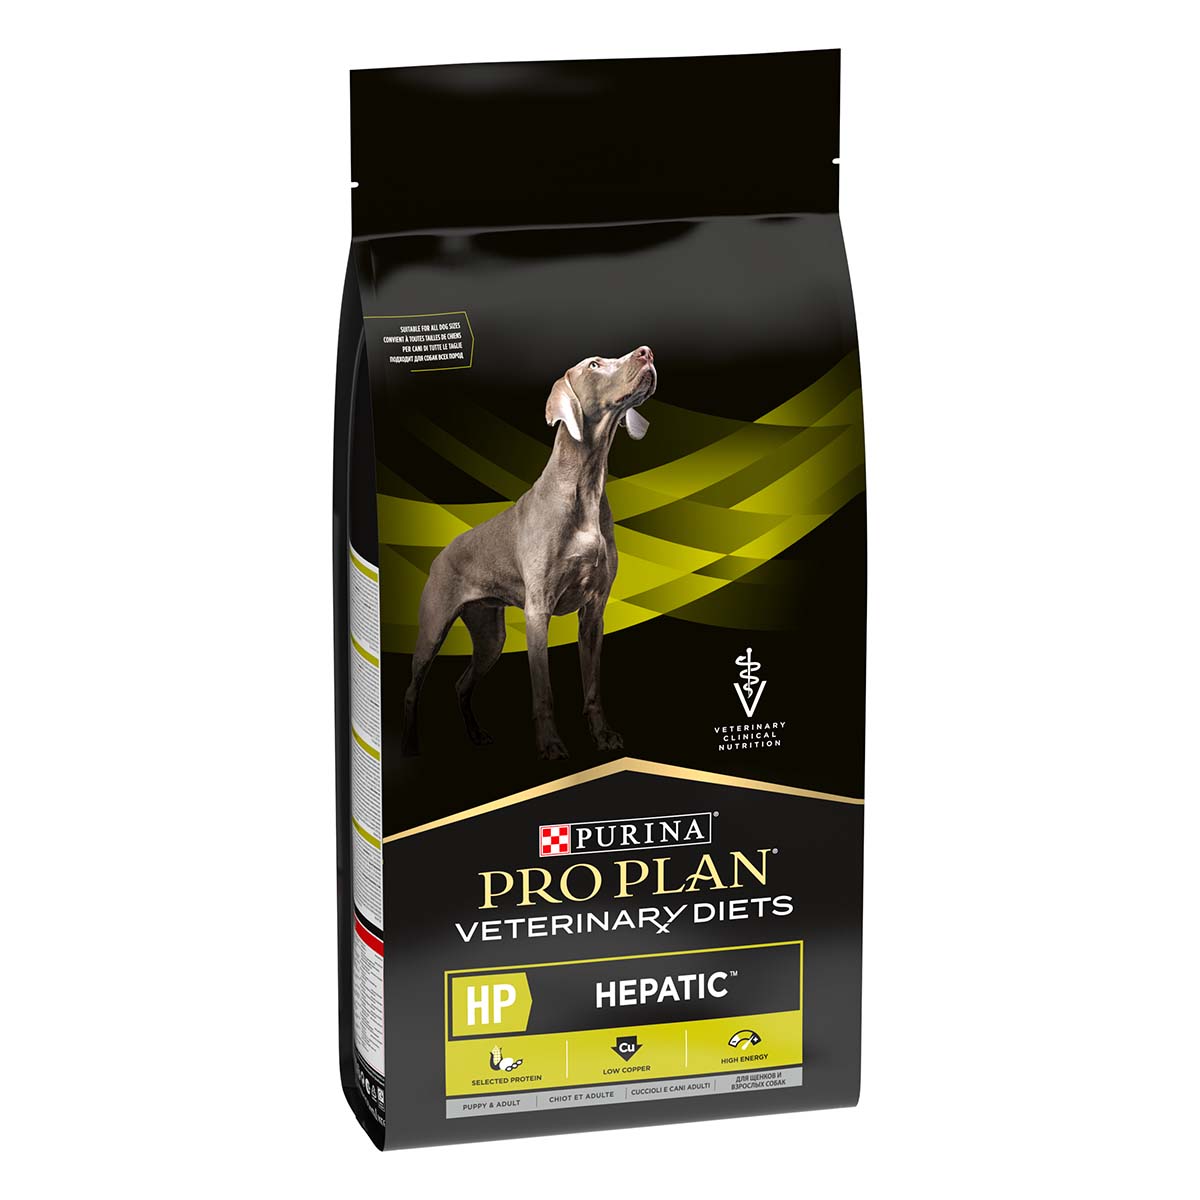 PPVD CANINE HP - HEPATIC 12kg